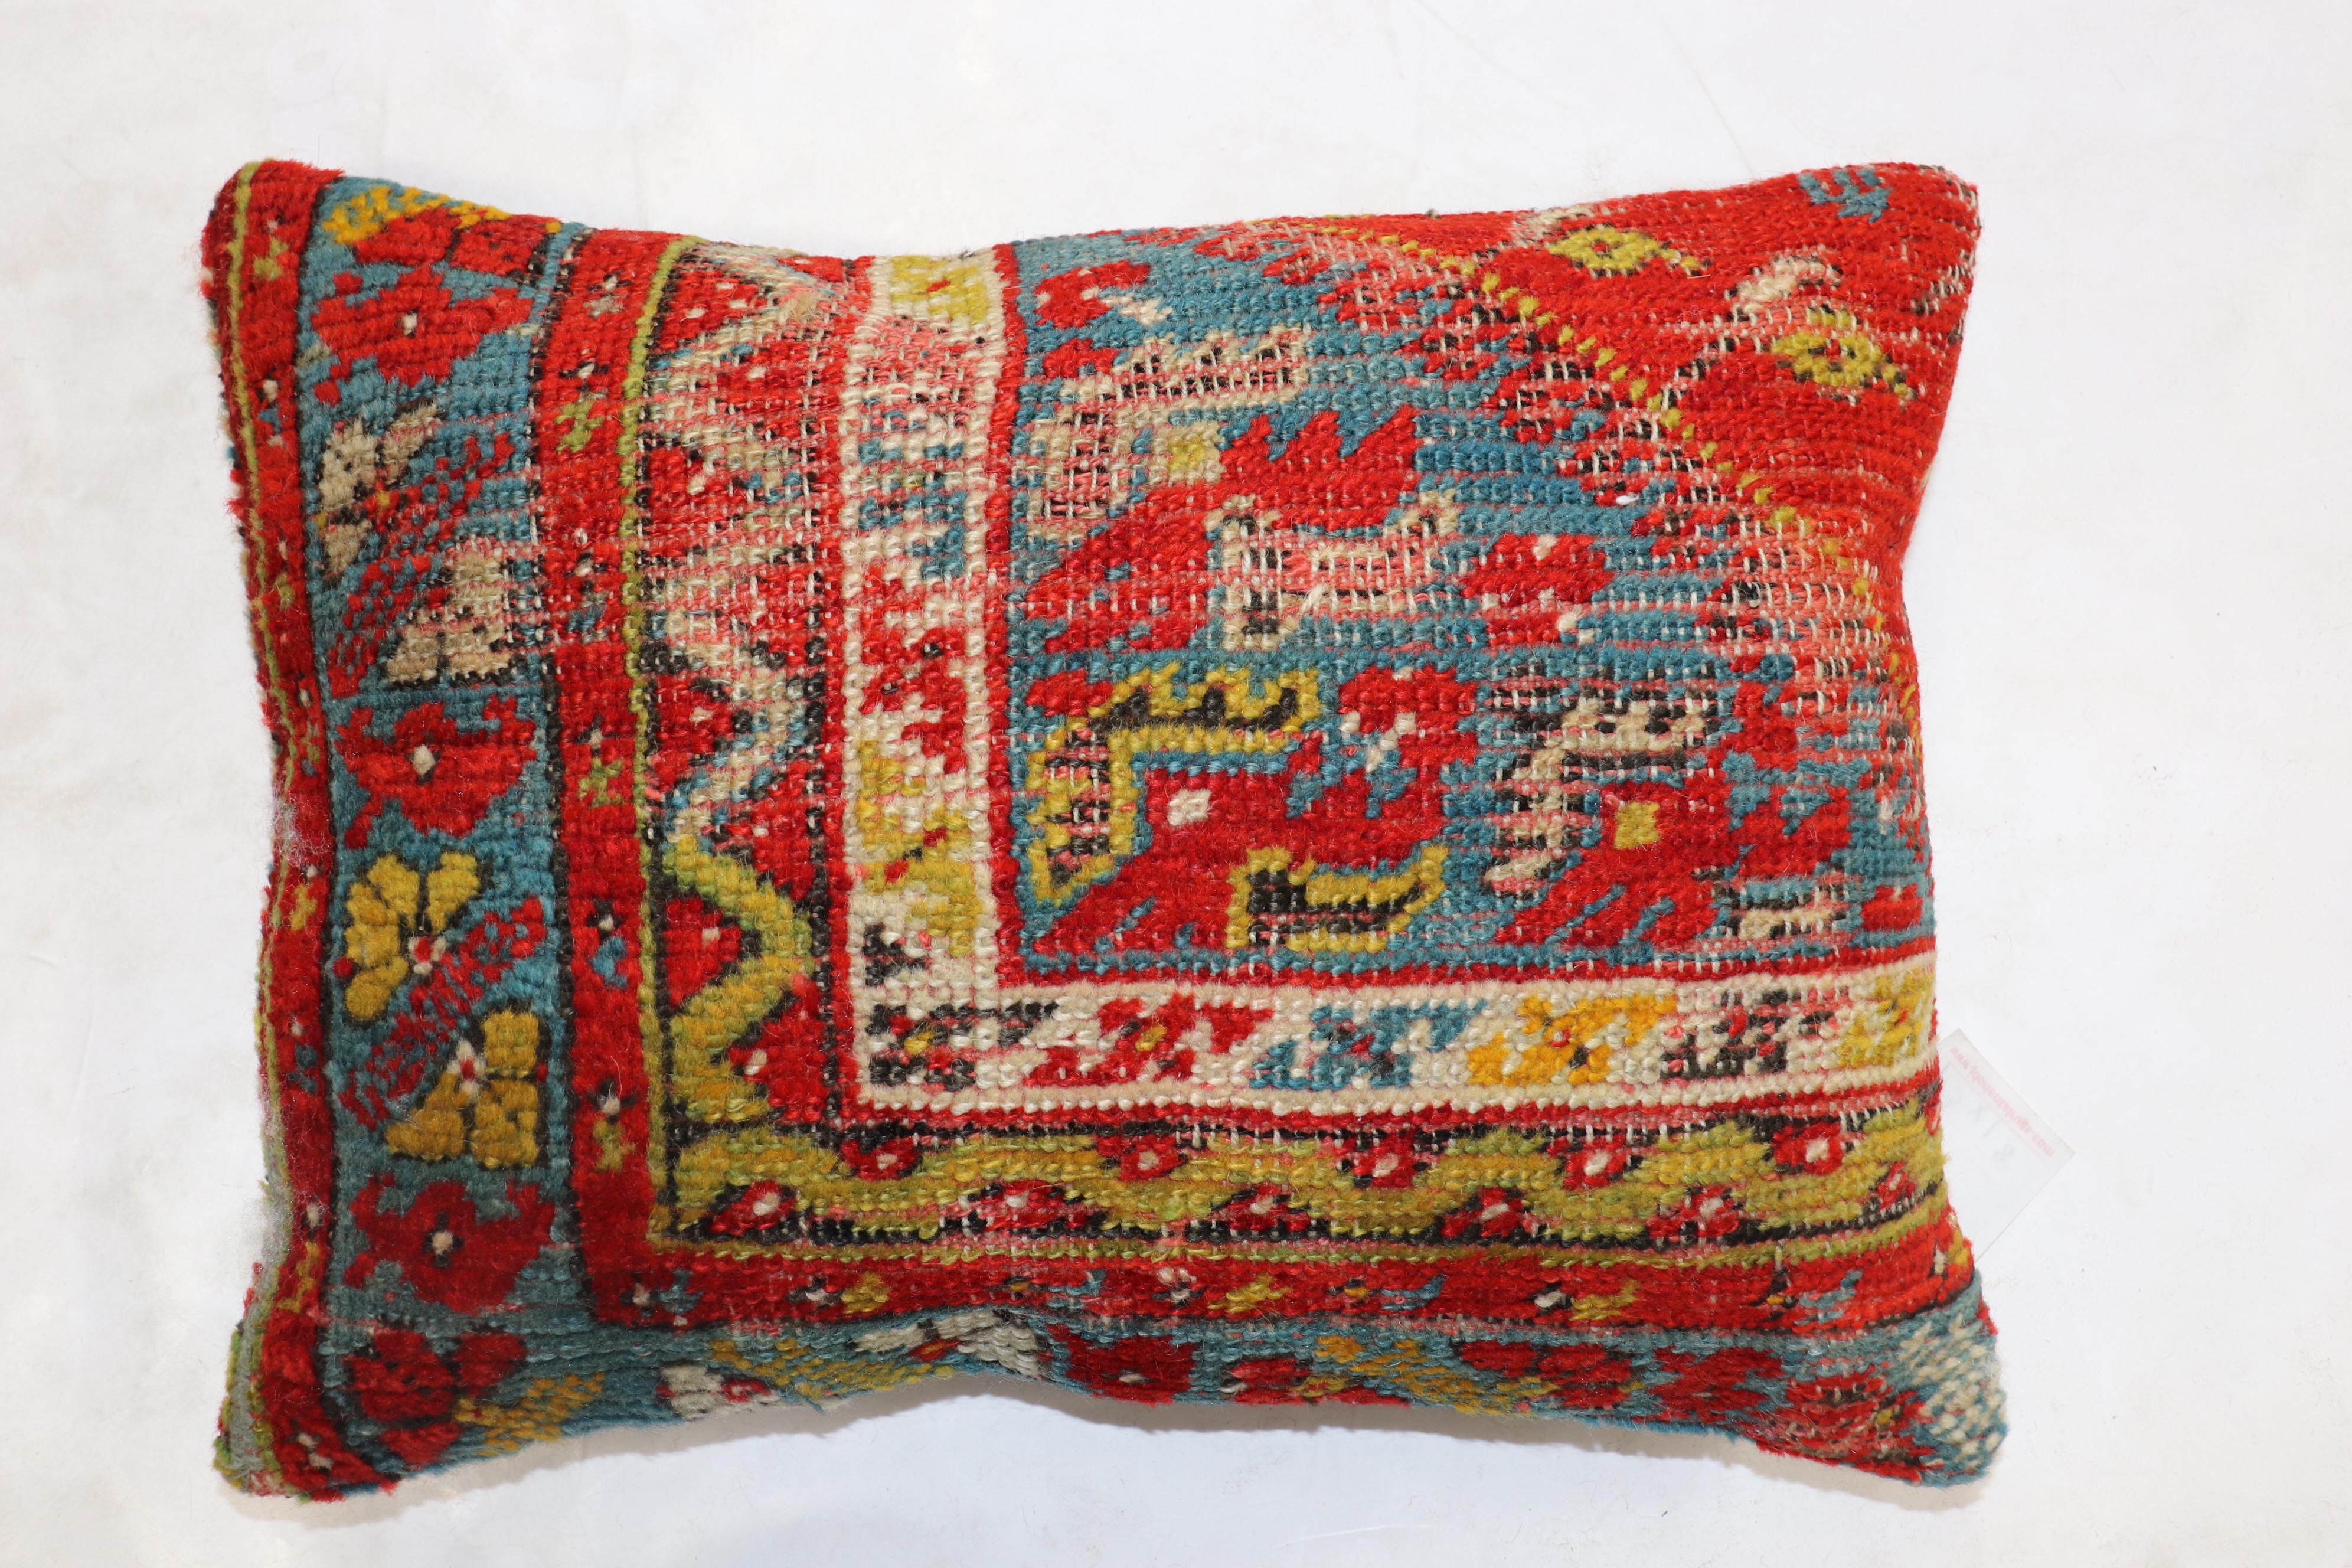 Pillow made from an angora Turkish oushak rug. Zipper closure and poly fill provided

Measures: 15'' x 20''.